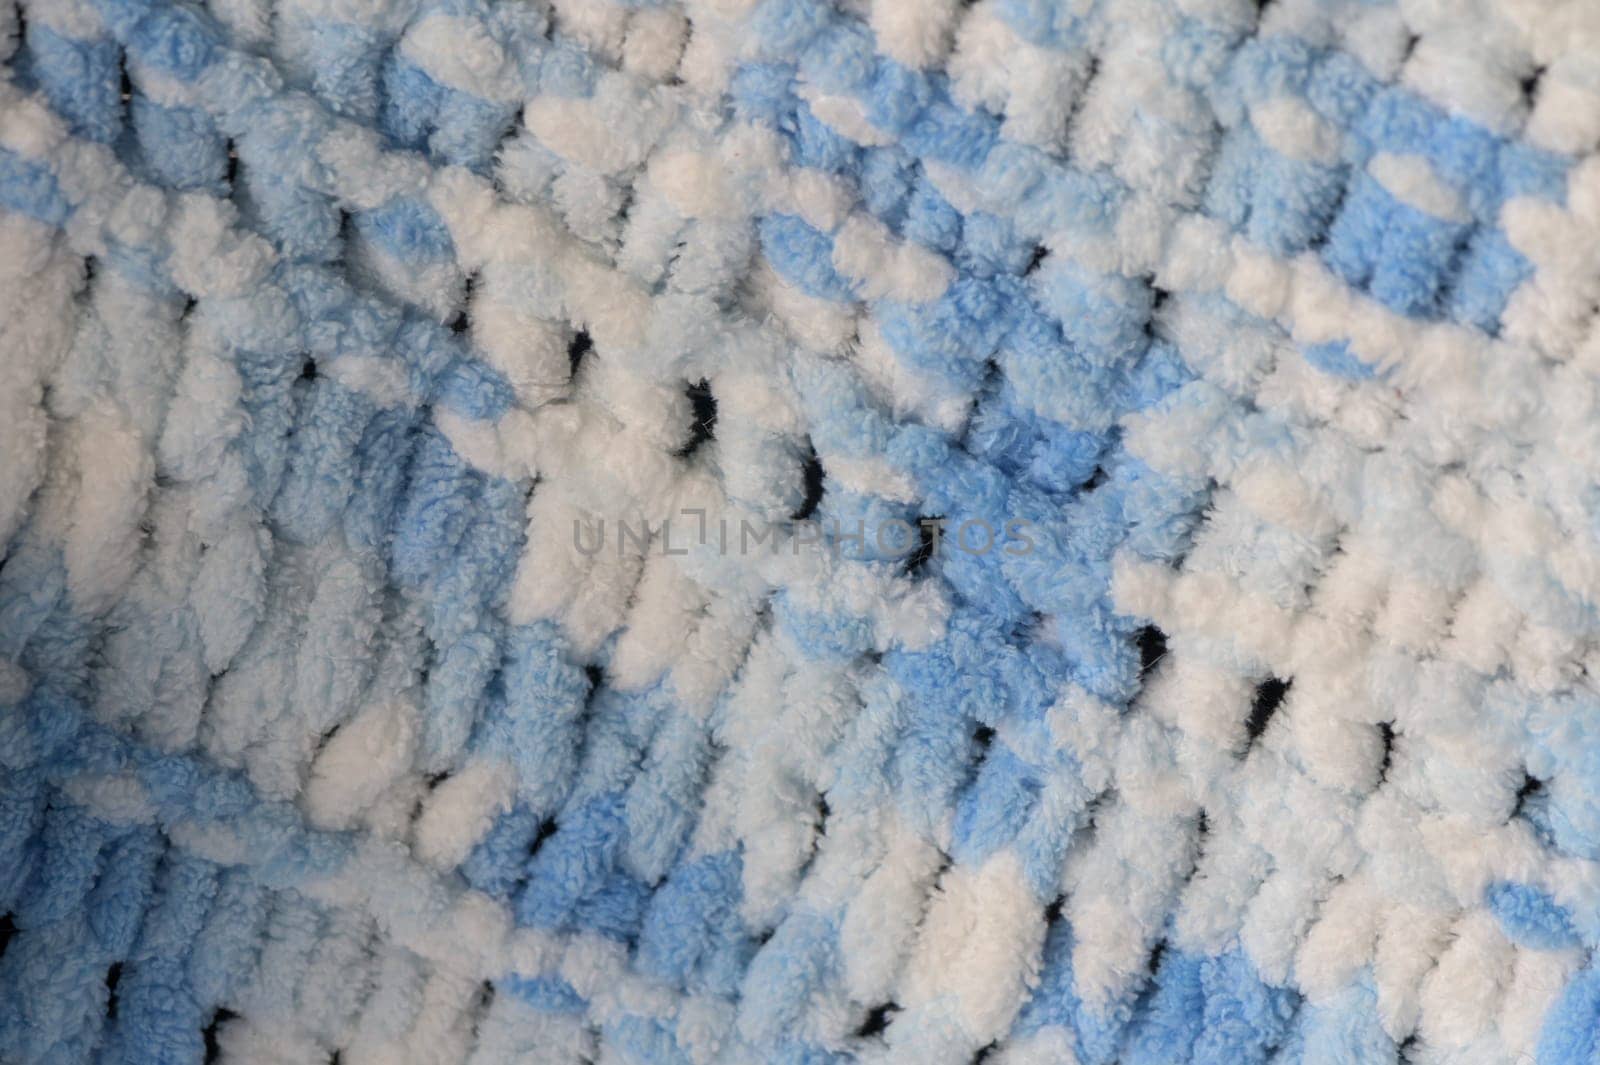 woolen blanket as a background in the photo